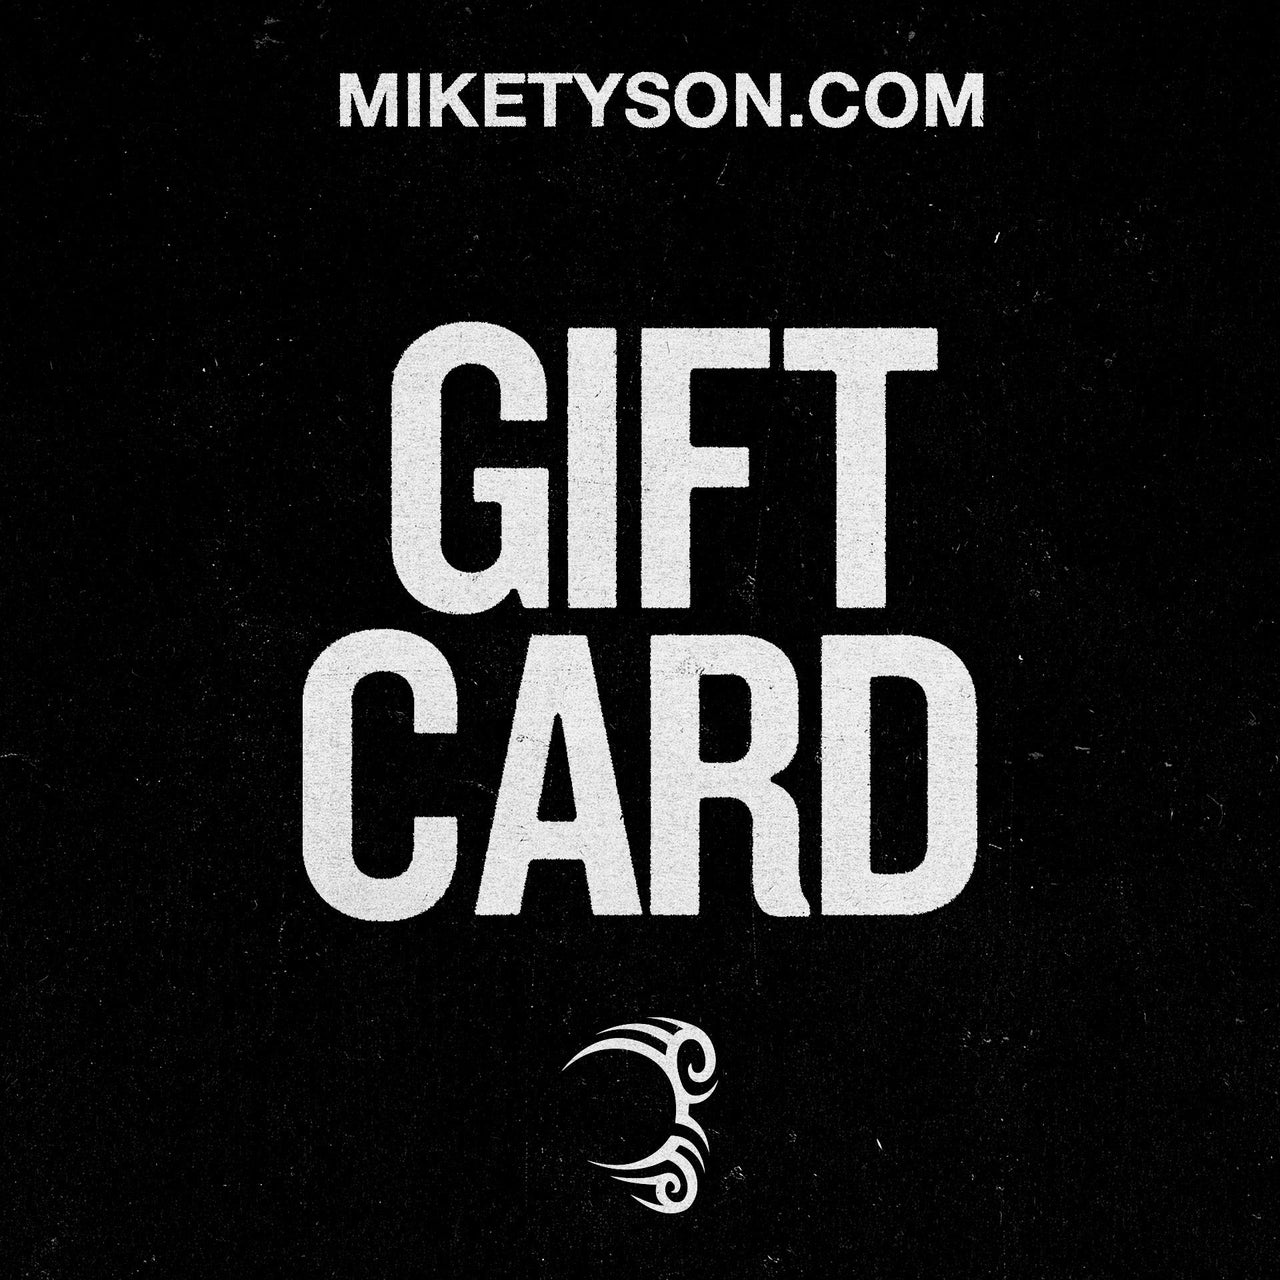 Mike Tyson Gift Card - MIKE TYSON